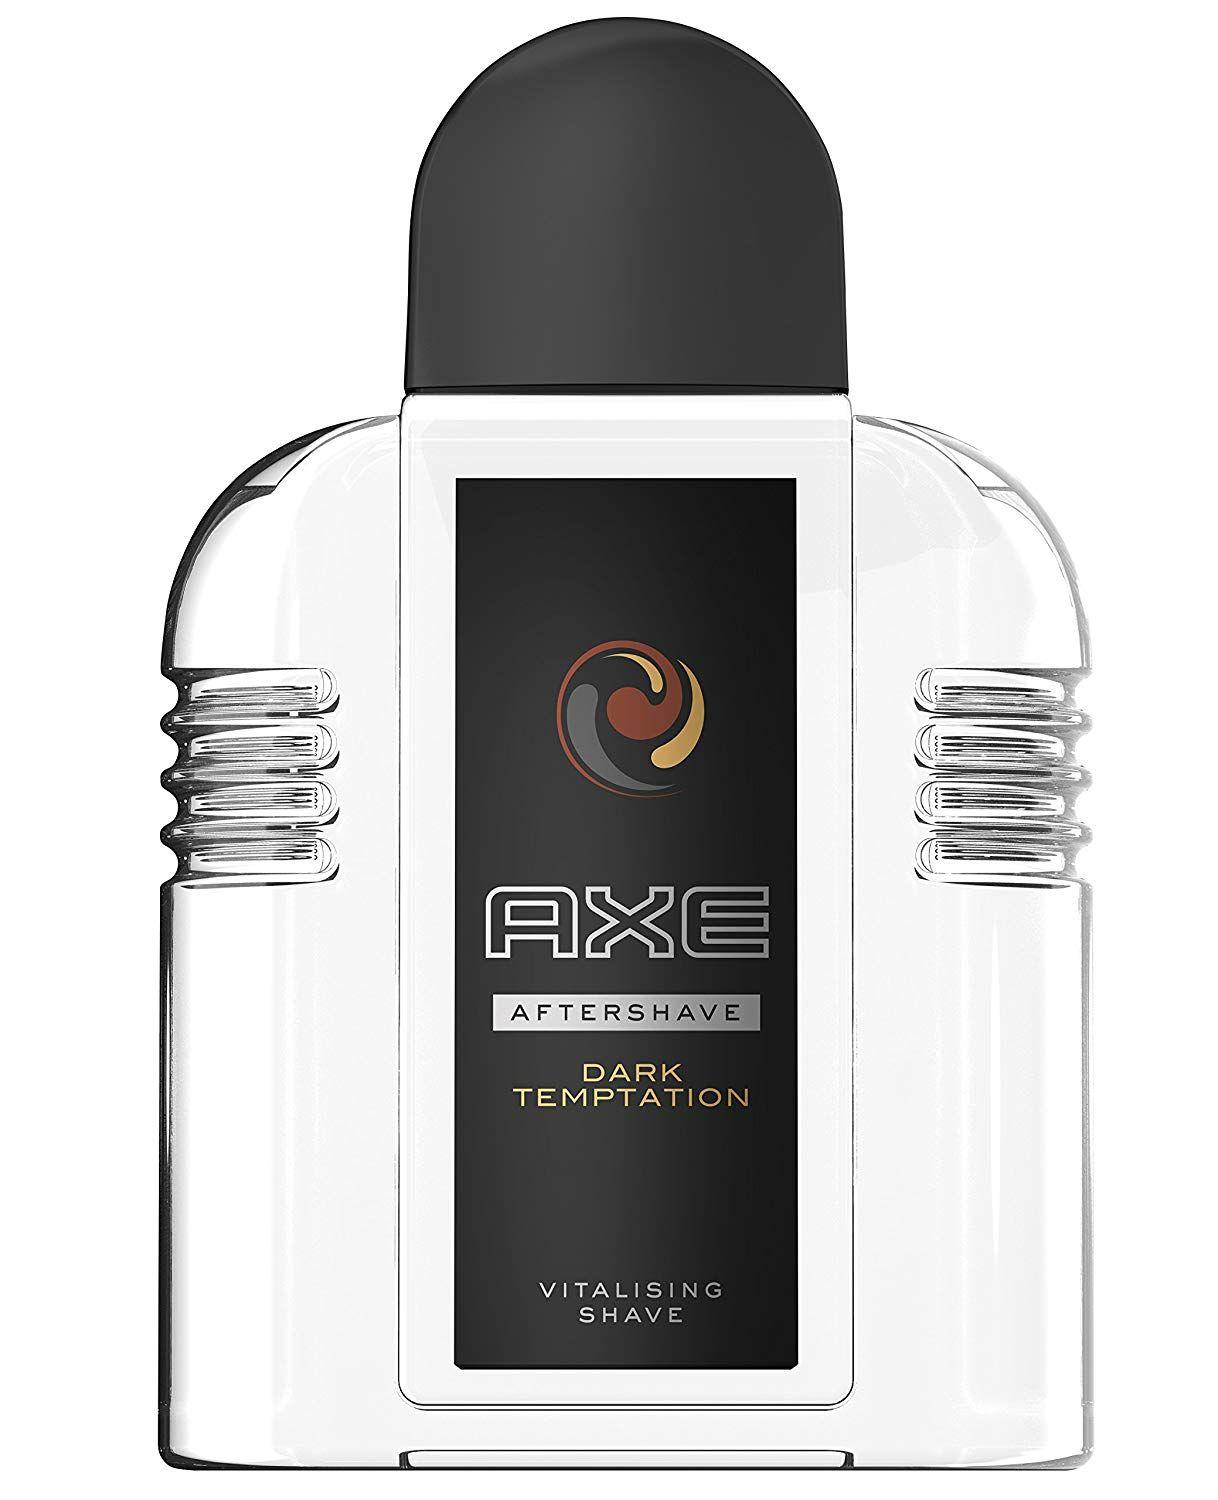 Shaving and Personal Care Products Logo - Axe Dark Temptation After Shave 100 ml [Personal Care]: Amazon.co.uk ...